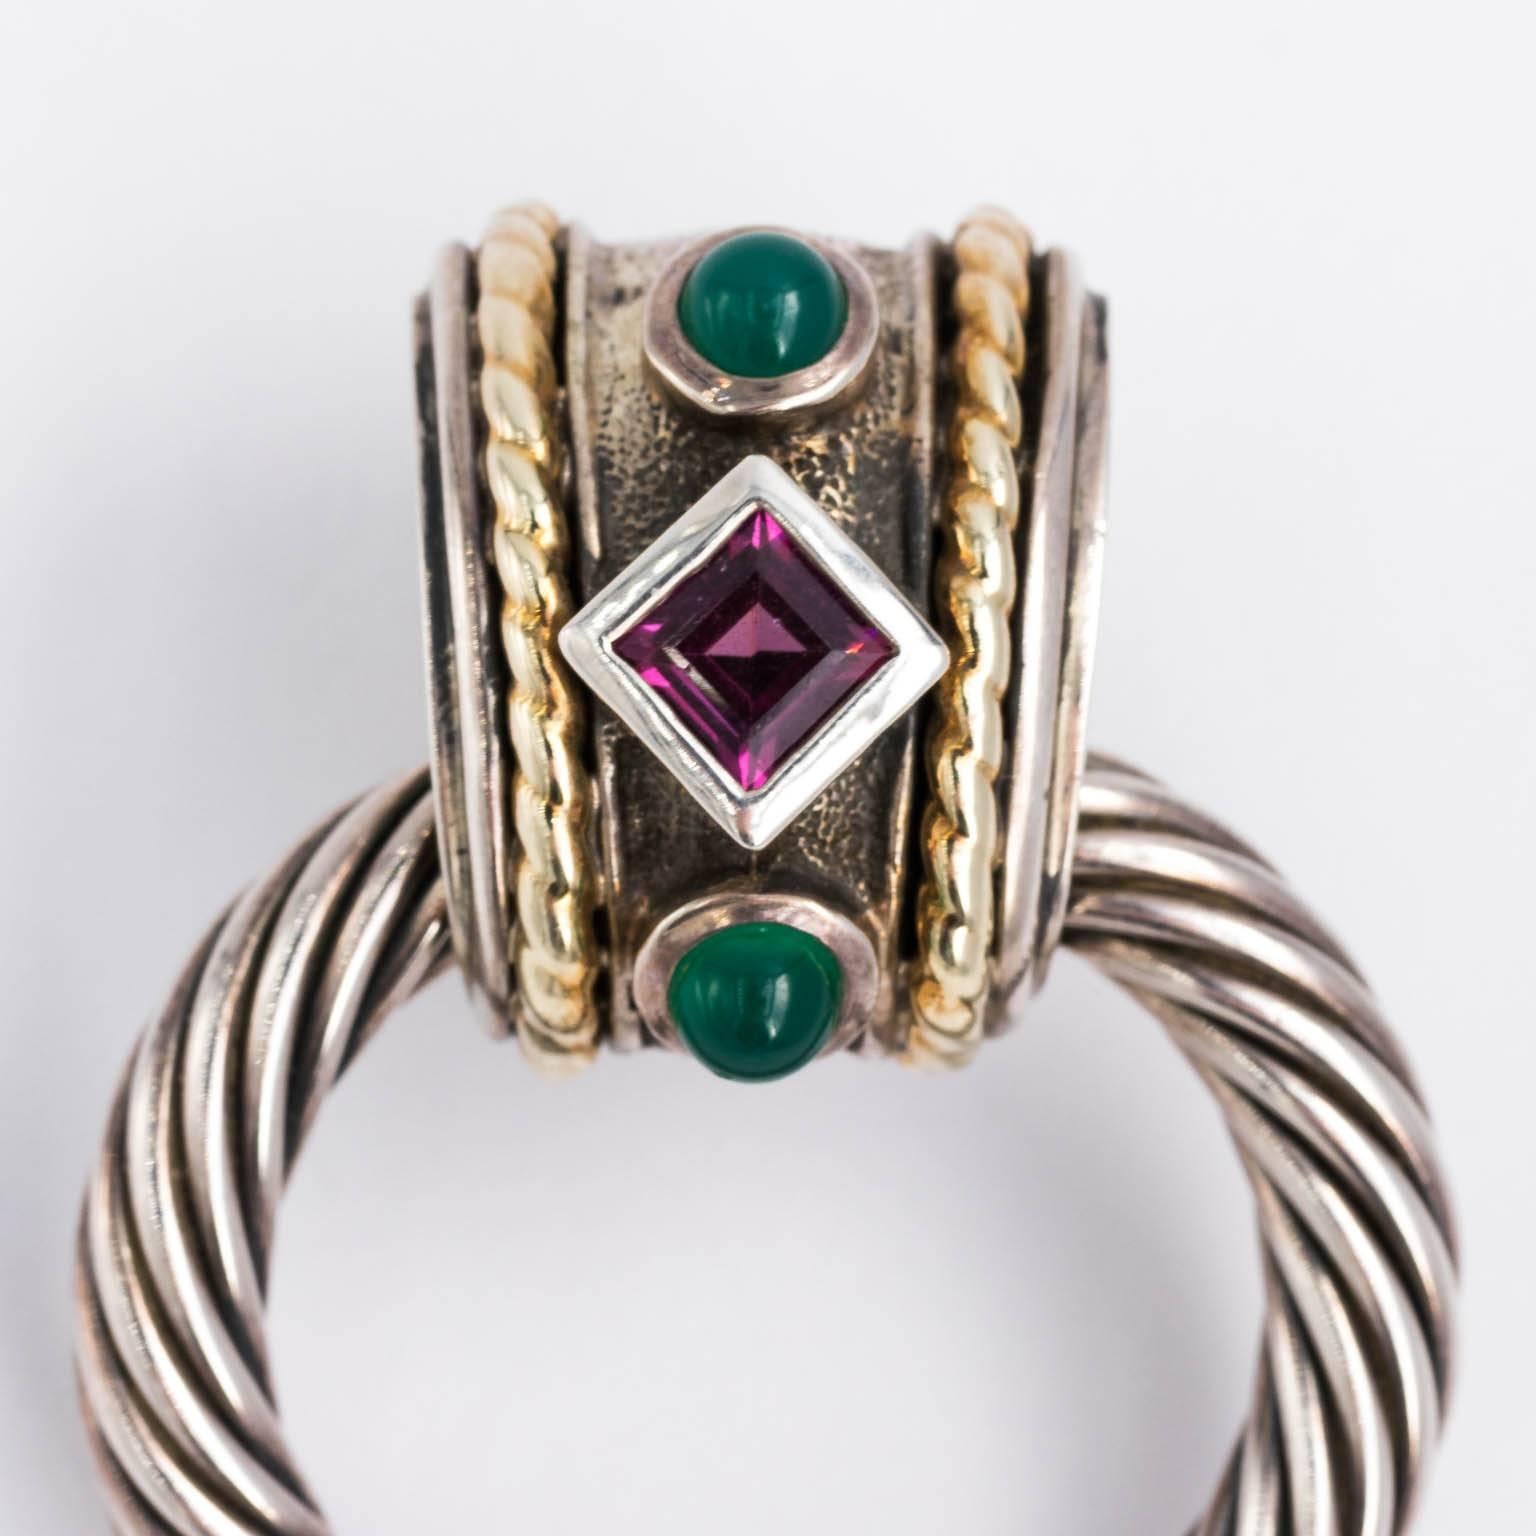 David Yurman cable 14 karat and sterling silver earrings door knocker style-Amethyst and Emerald cabochon-Fabulous vintage look. Omega backs.
